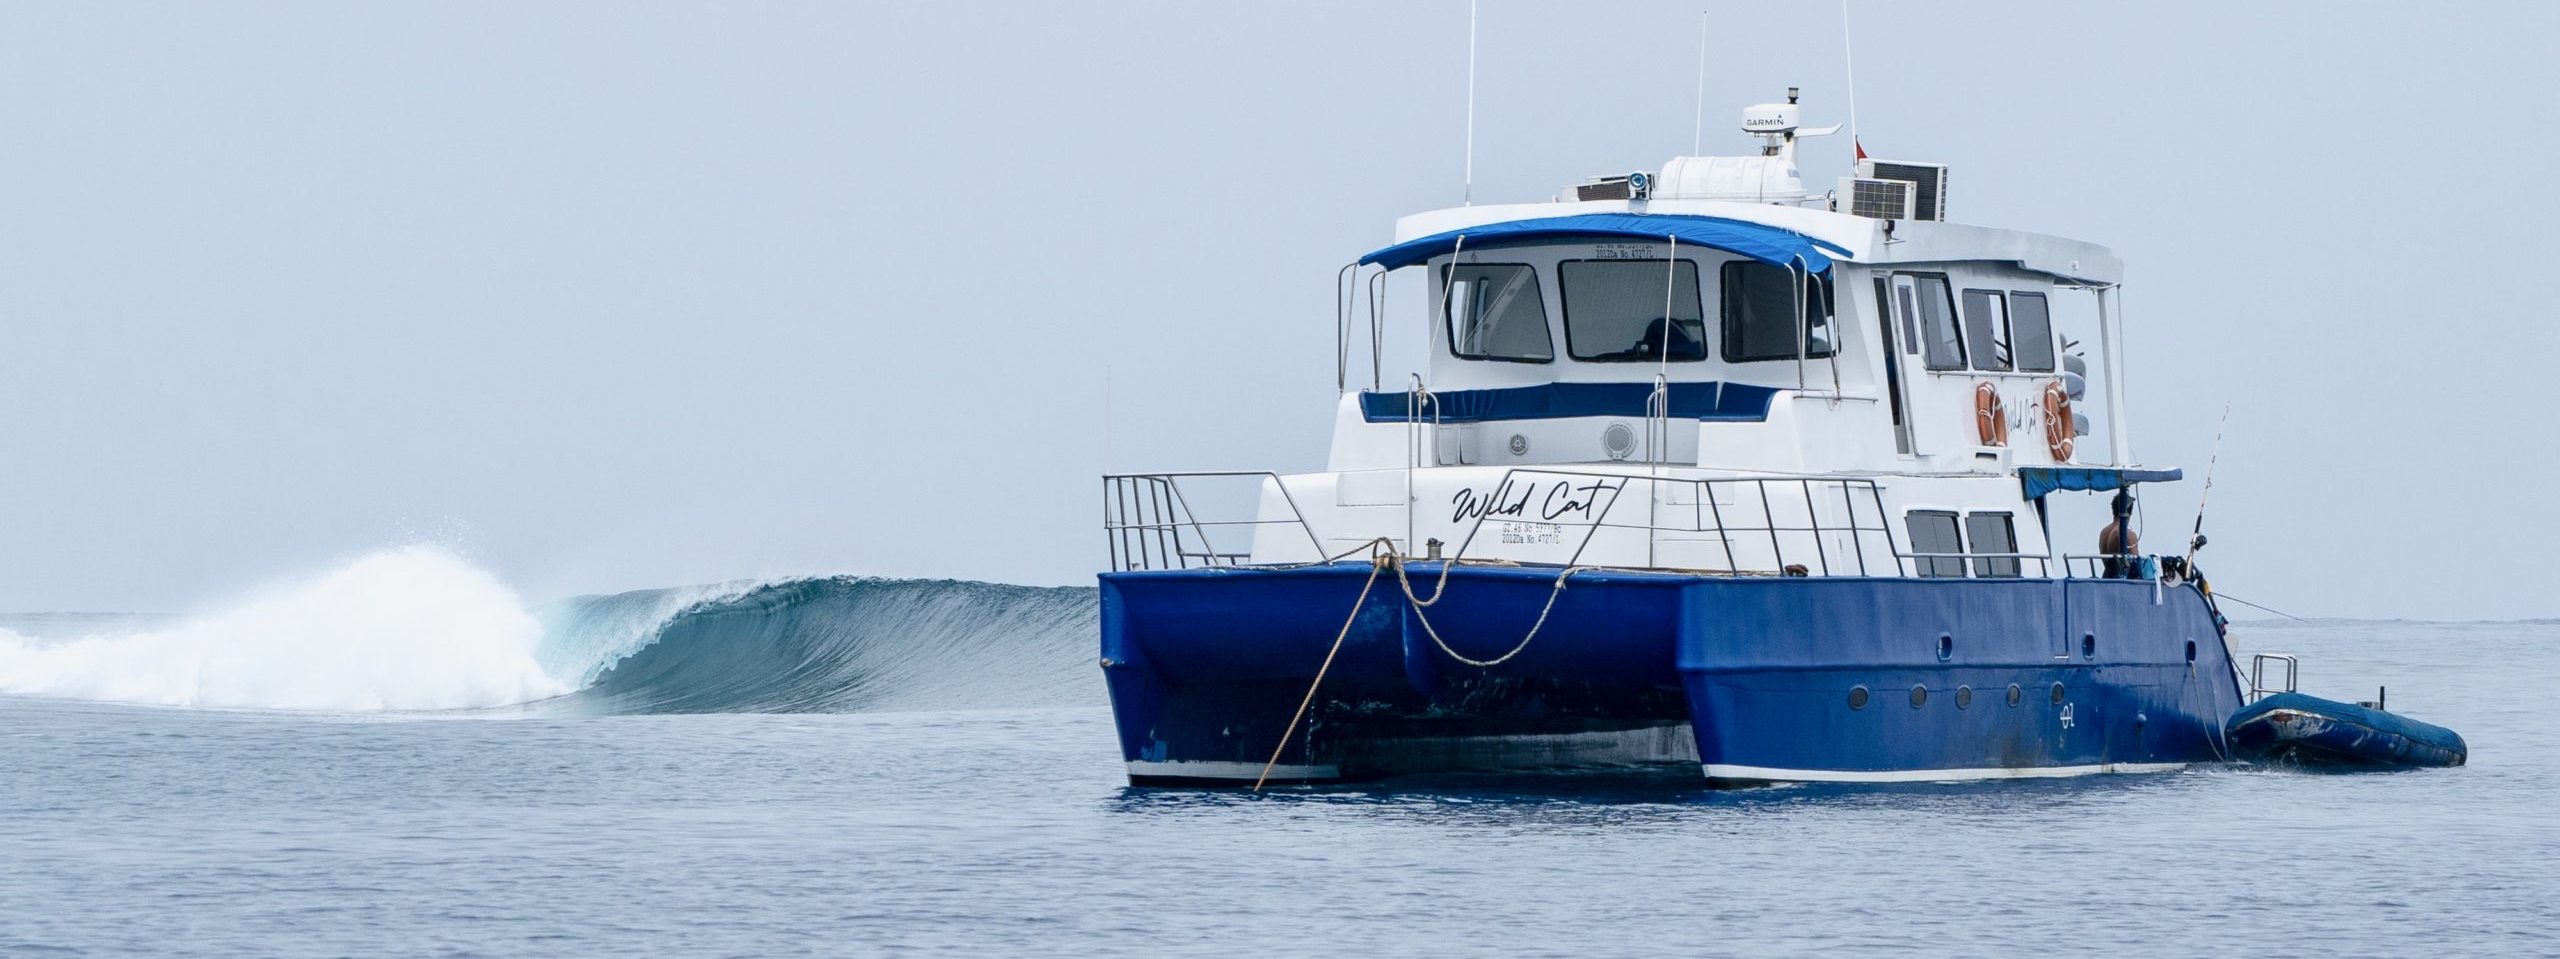 Wild Cat Surf Charters